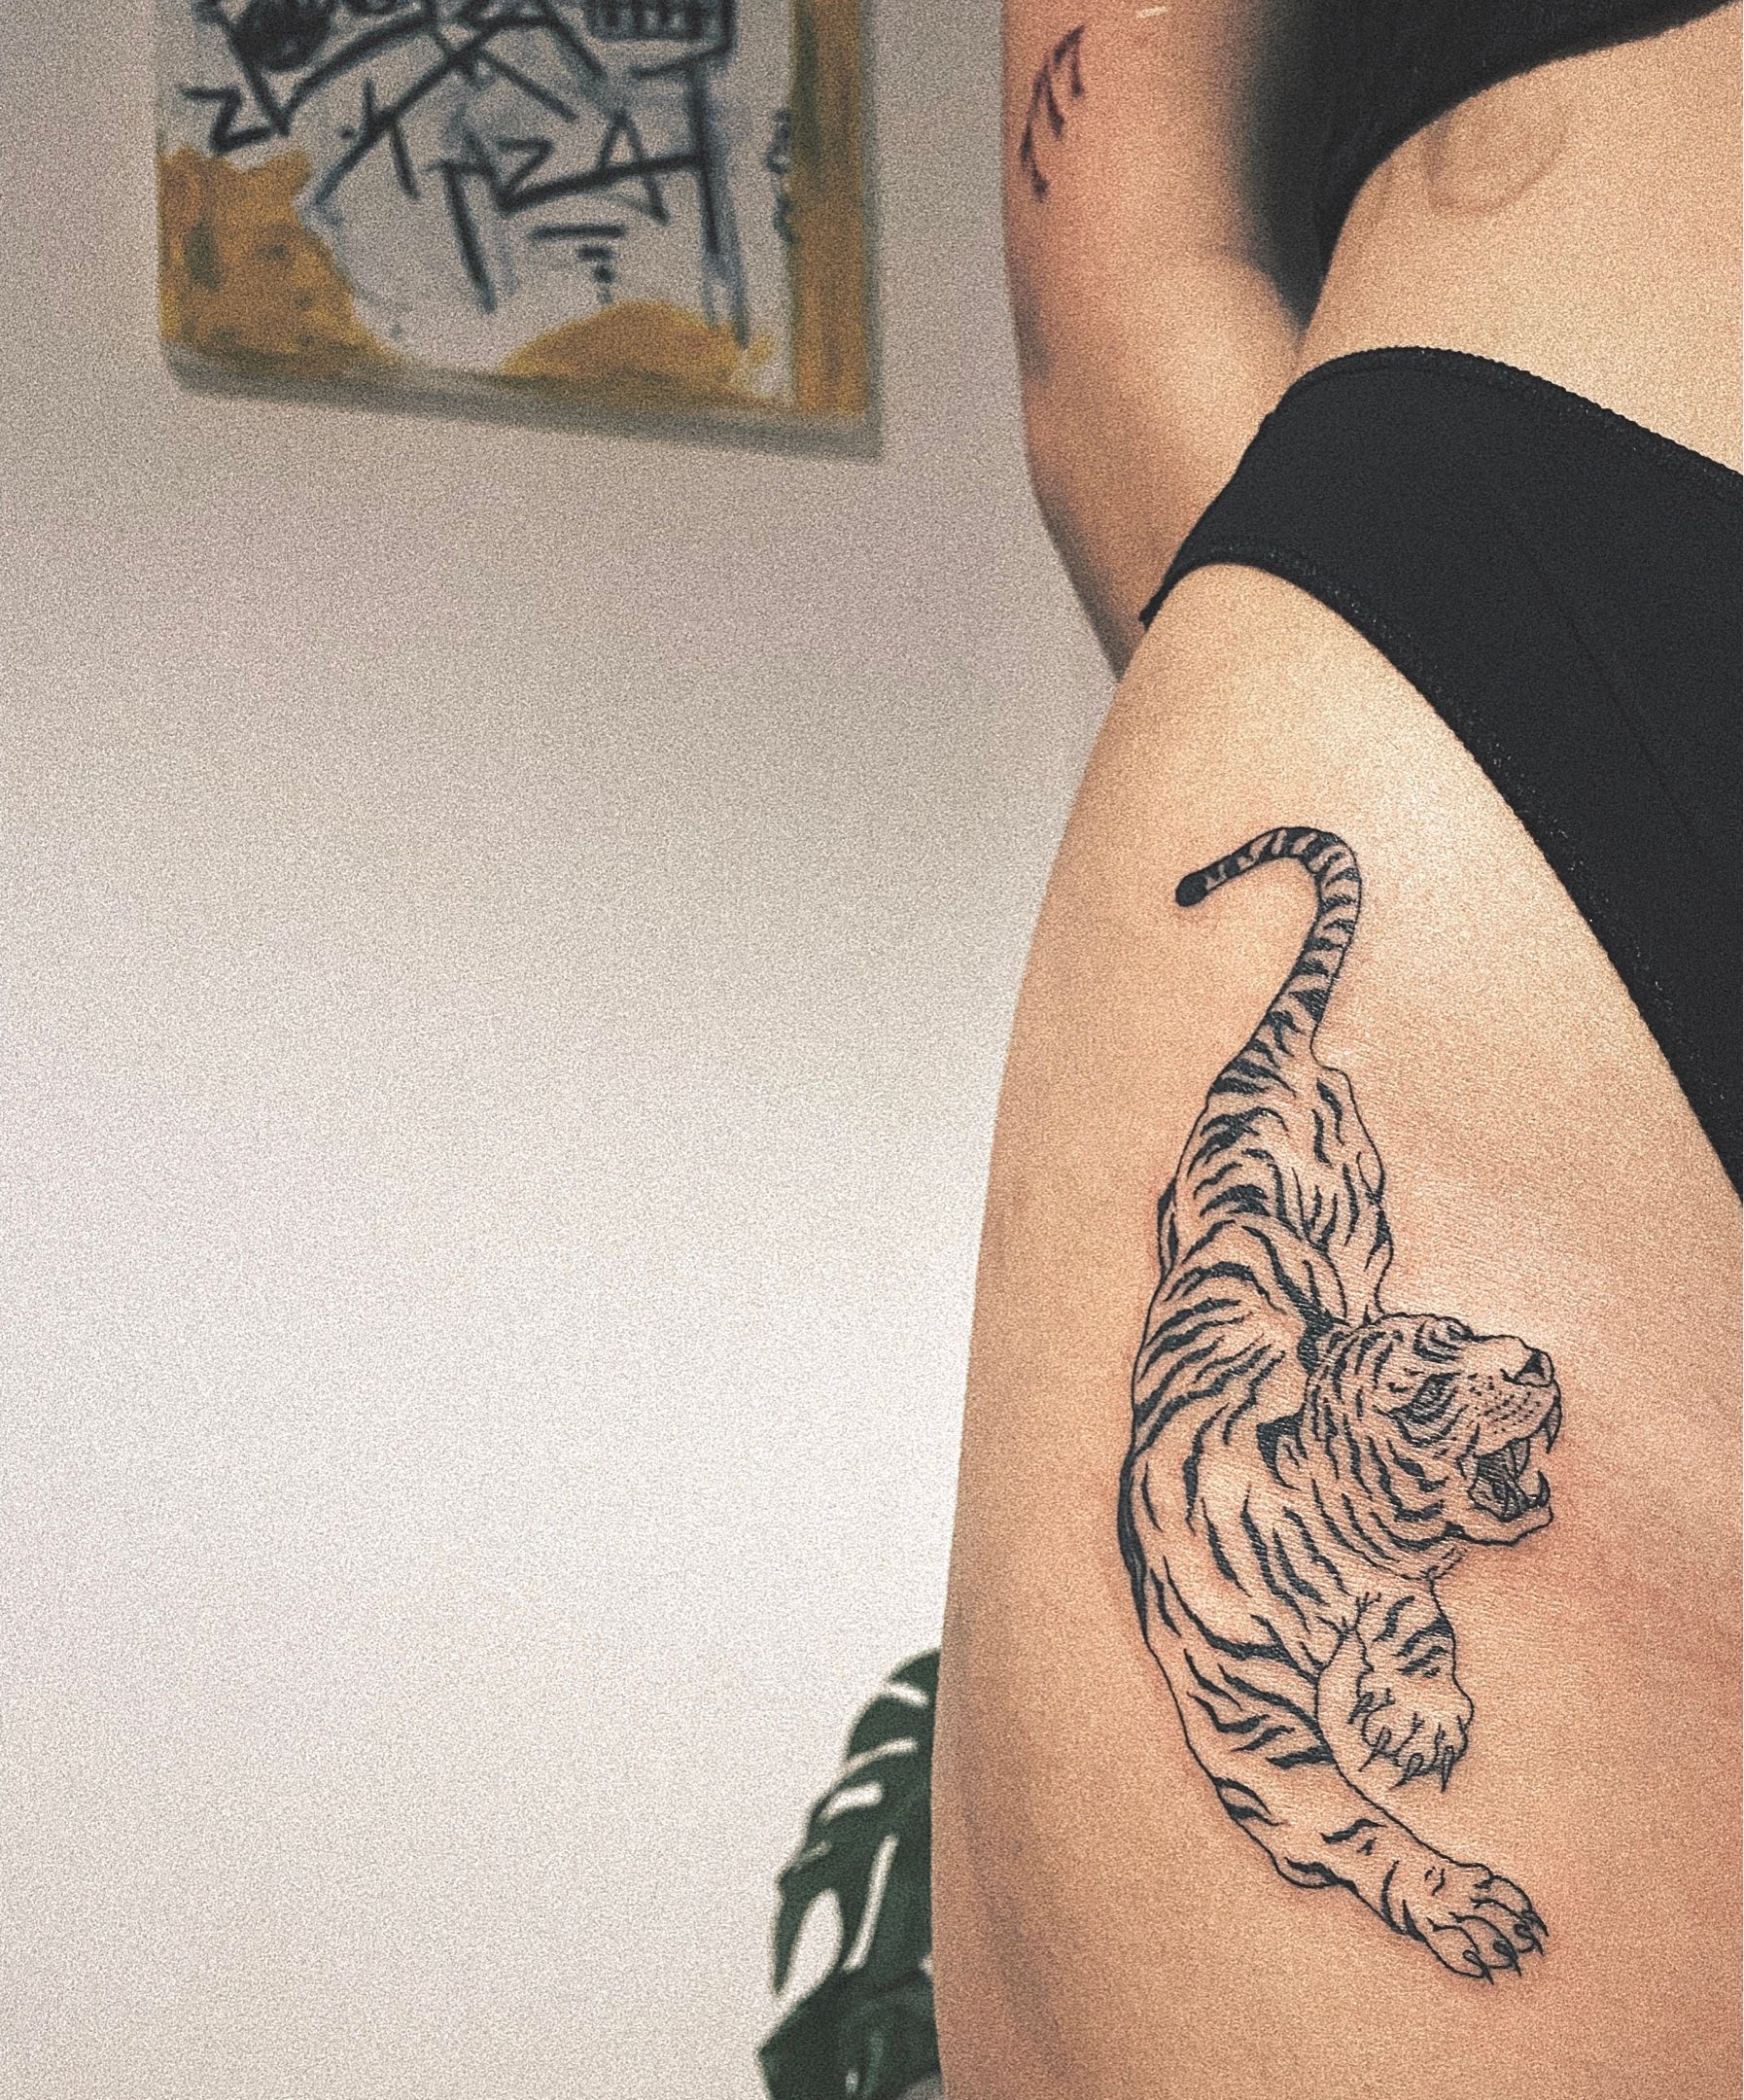 101 Best Simple Tiger Tattoo Ideas That Will Blow Your Mind!